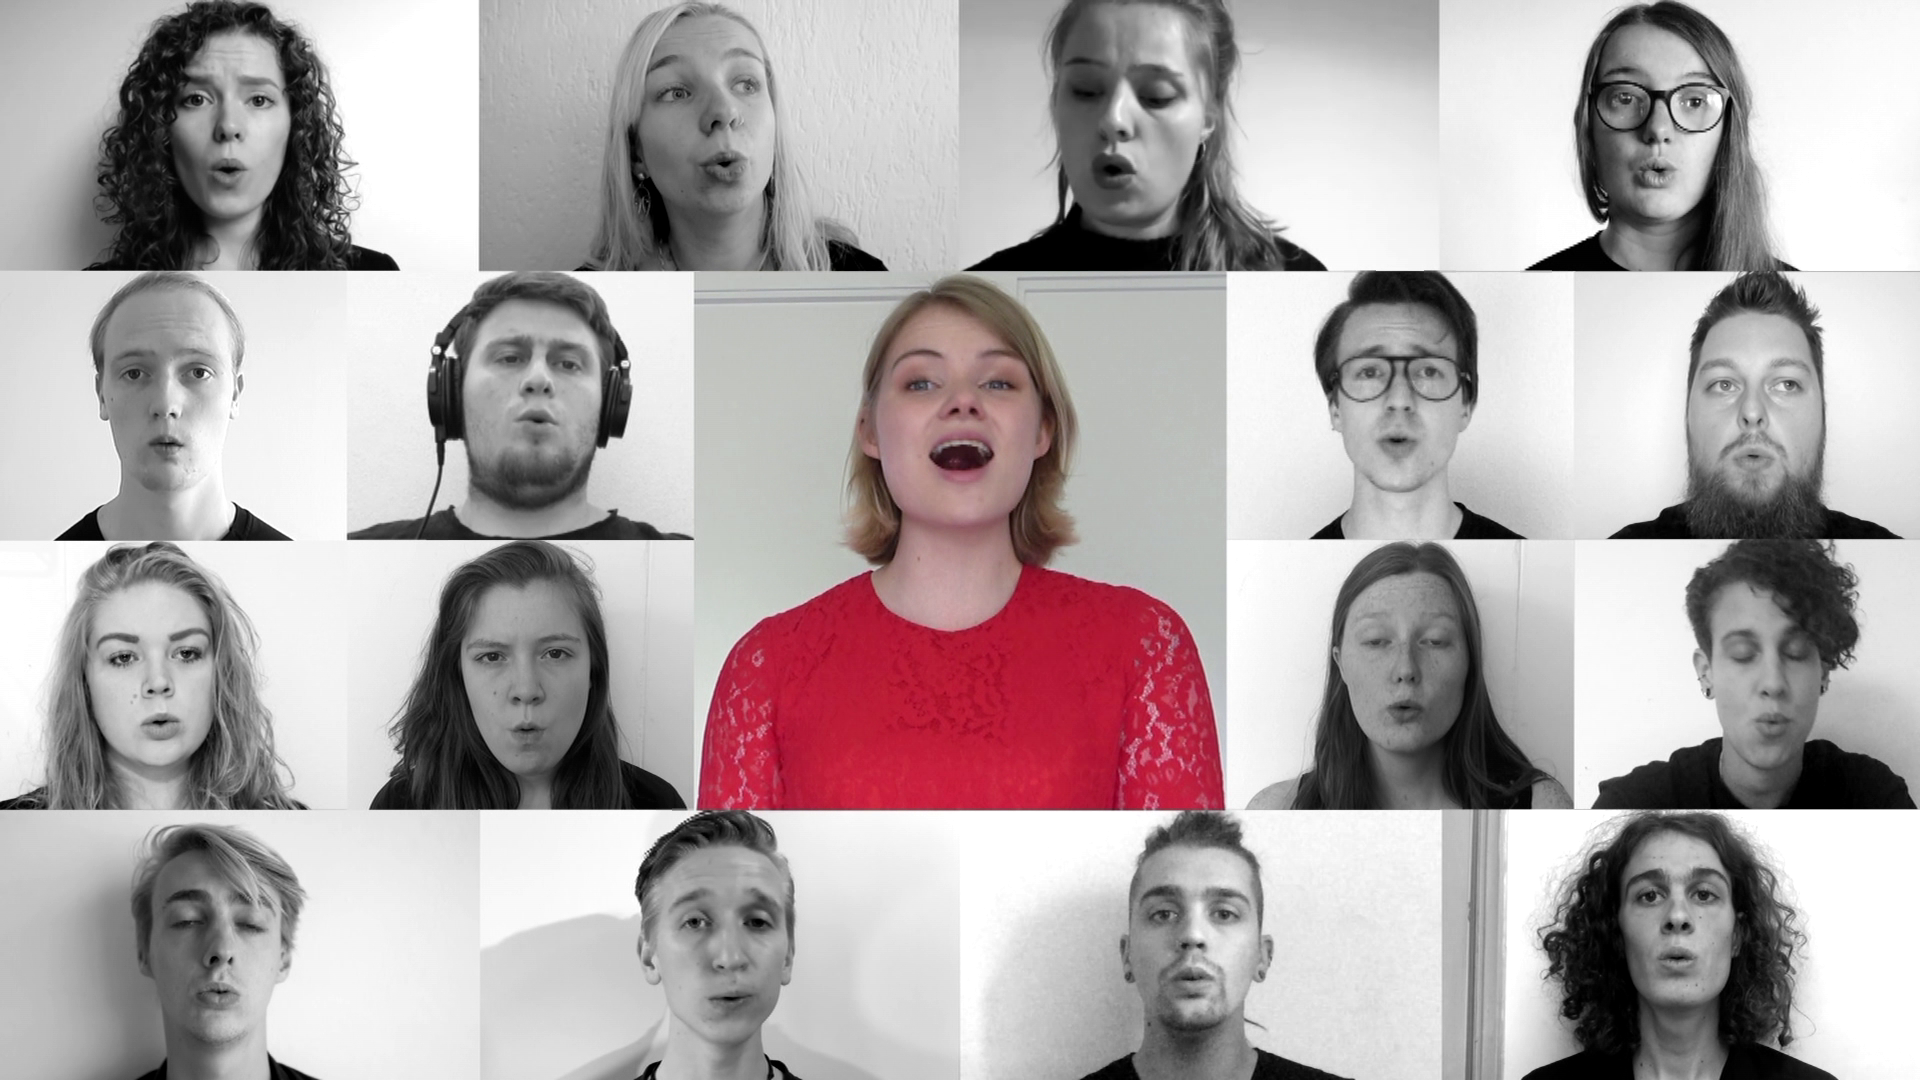 Still from Groei - Suzanne de Jong. A splitscreen edit of a choir with 17 different singers, all have their own close-up shots. All are in black and white except for Suzanne, who is wearing a red dress with lace details.